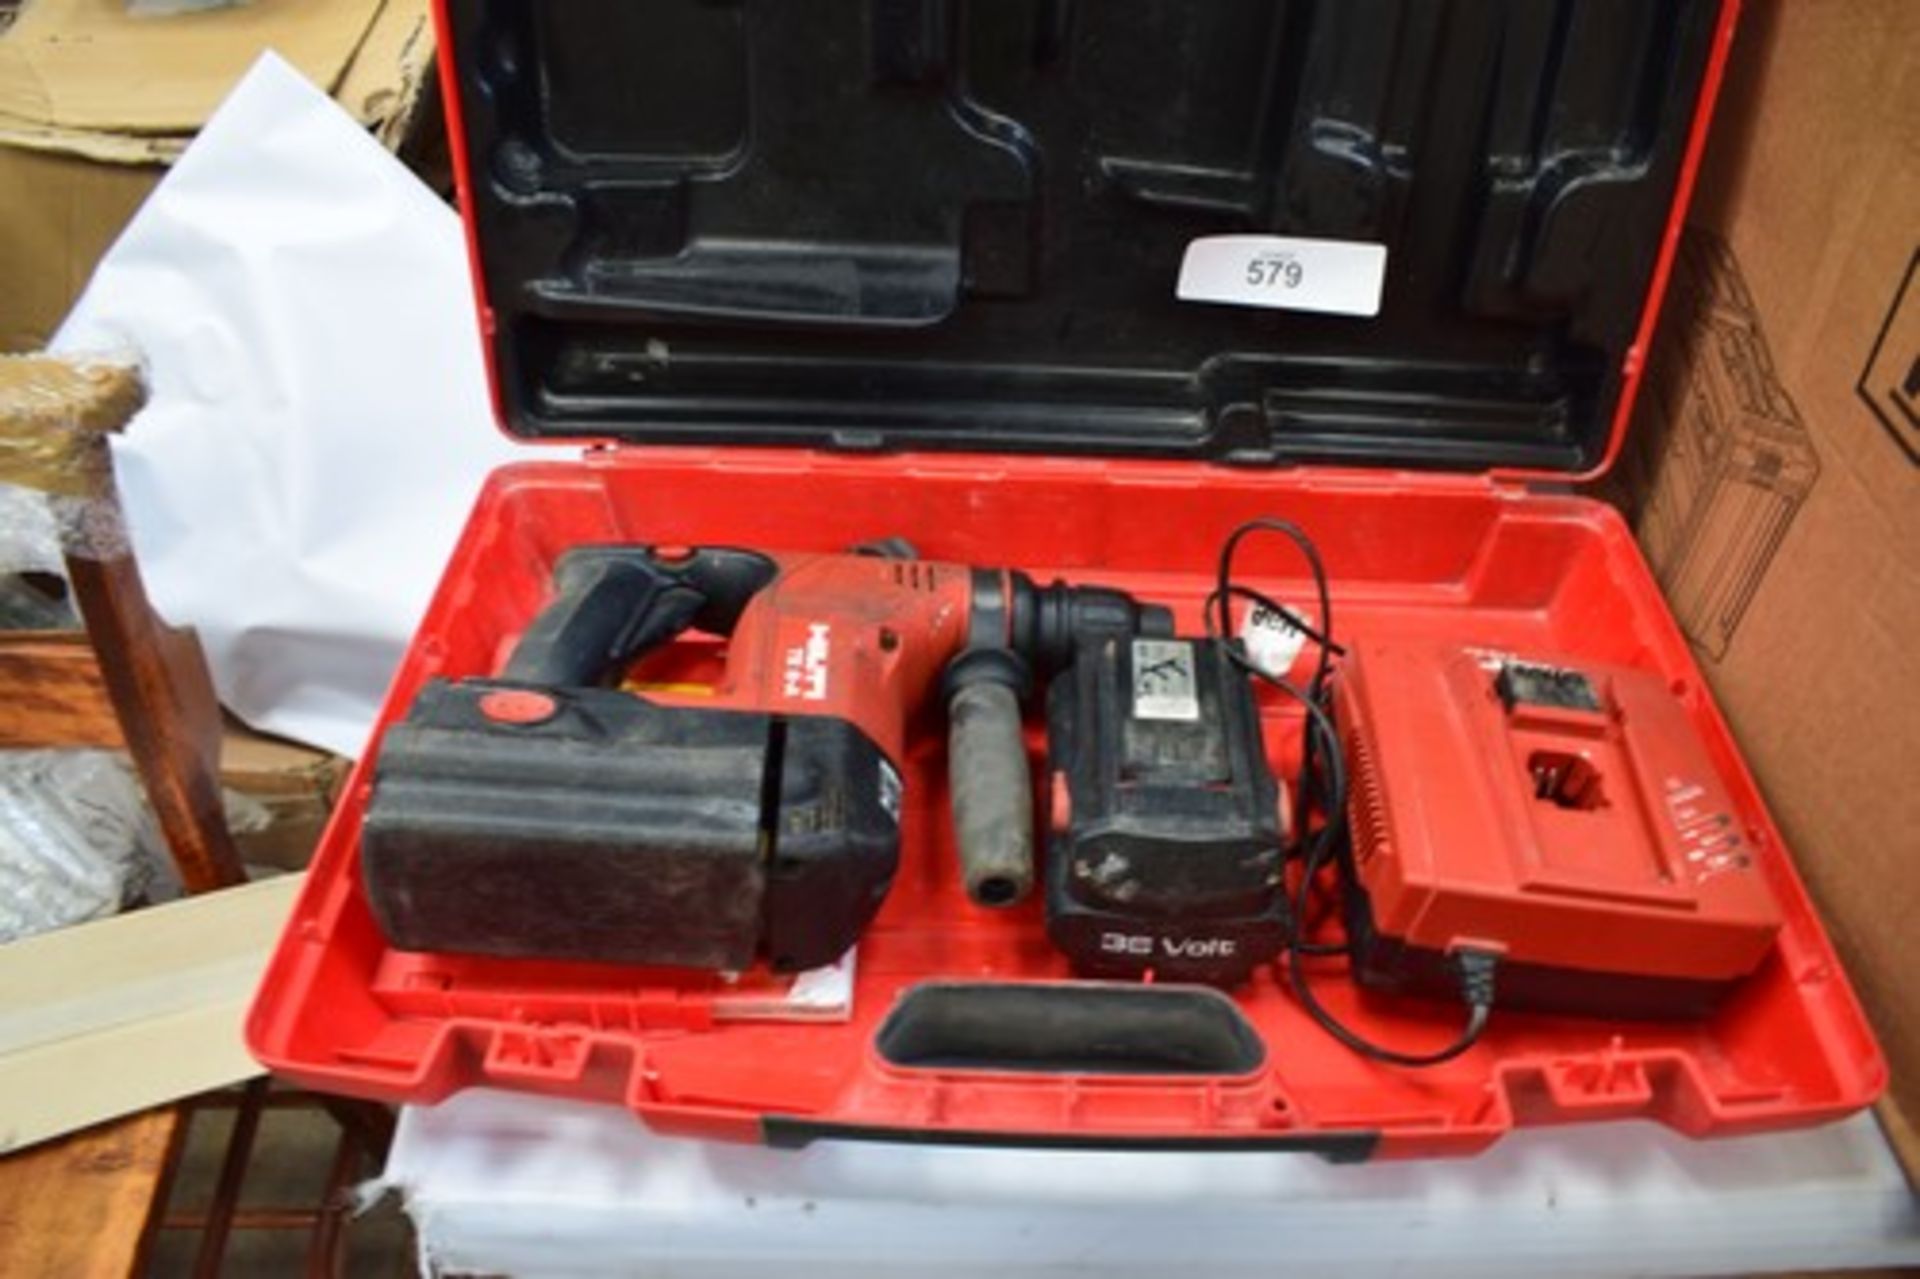 1 x Hilti cordless hammer drill, model: TE 6-A, 36v 12amp and charger - working, sold with a faulty